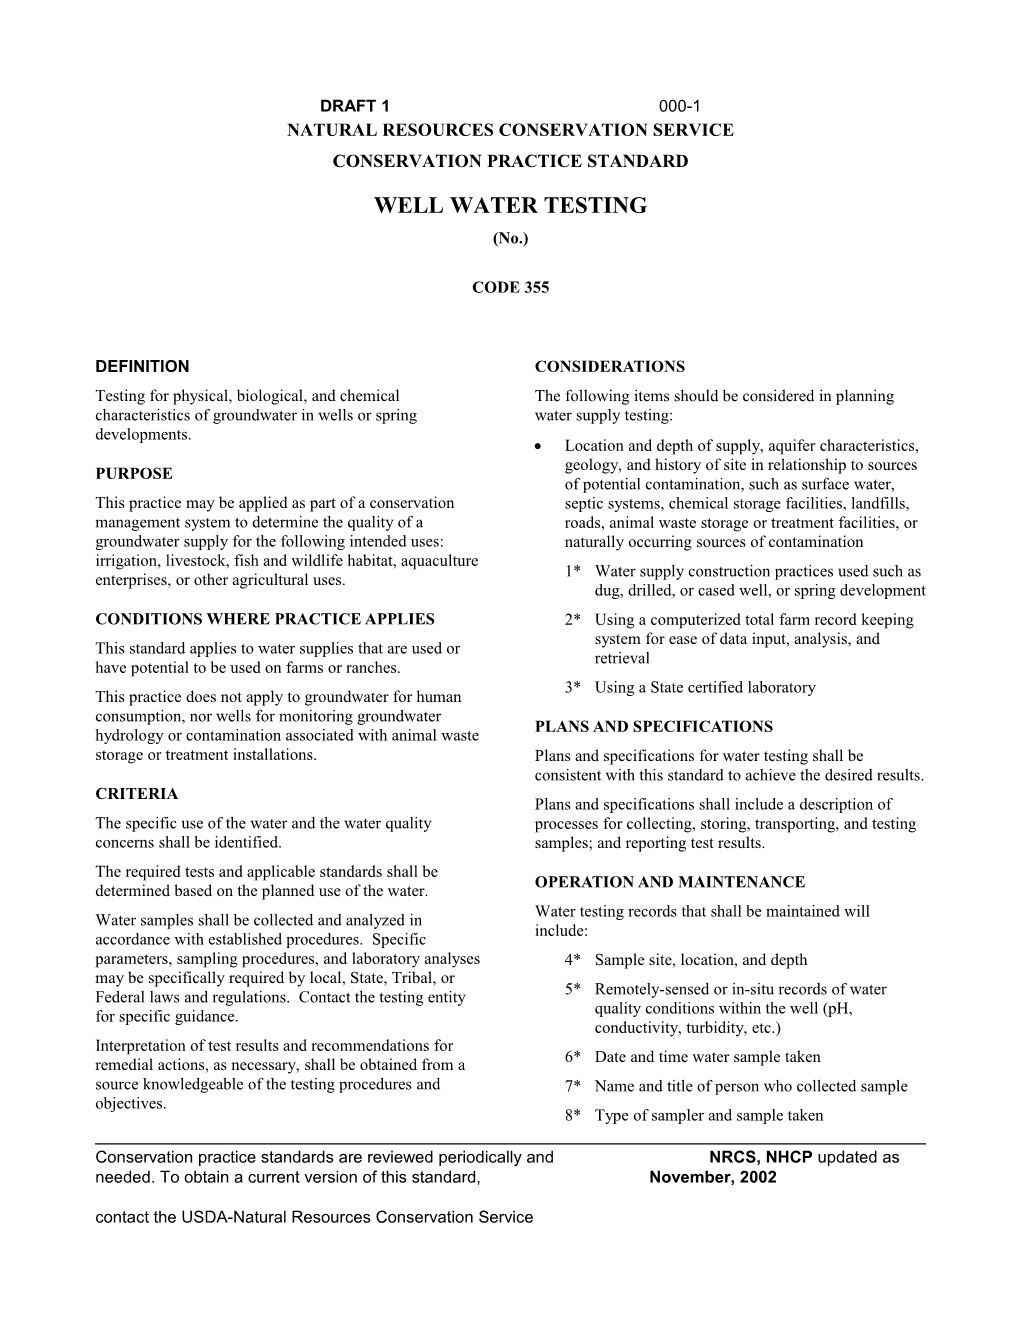 355-Well Water Testing